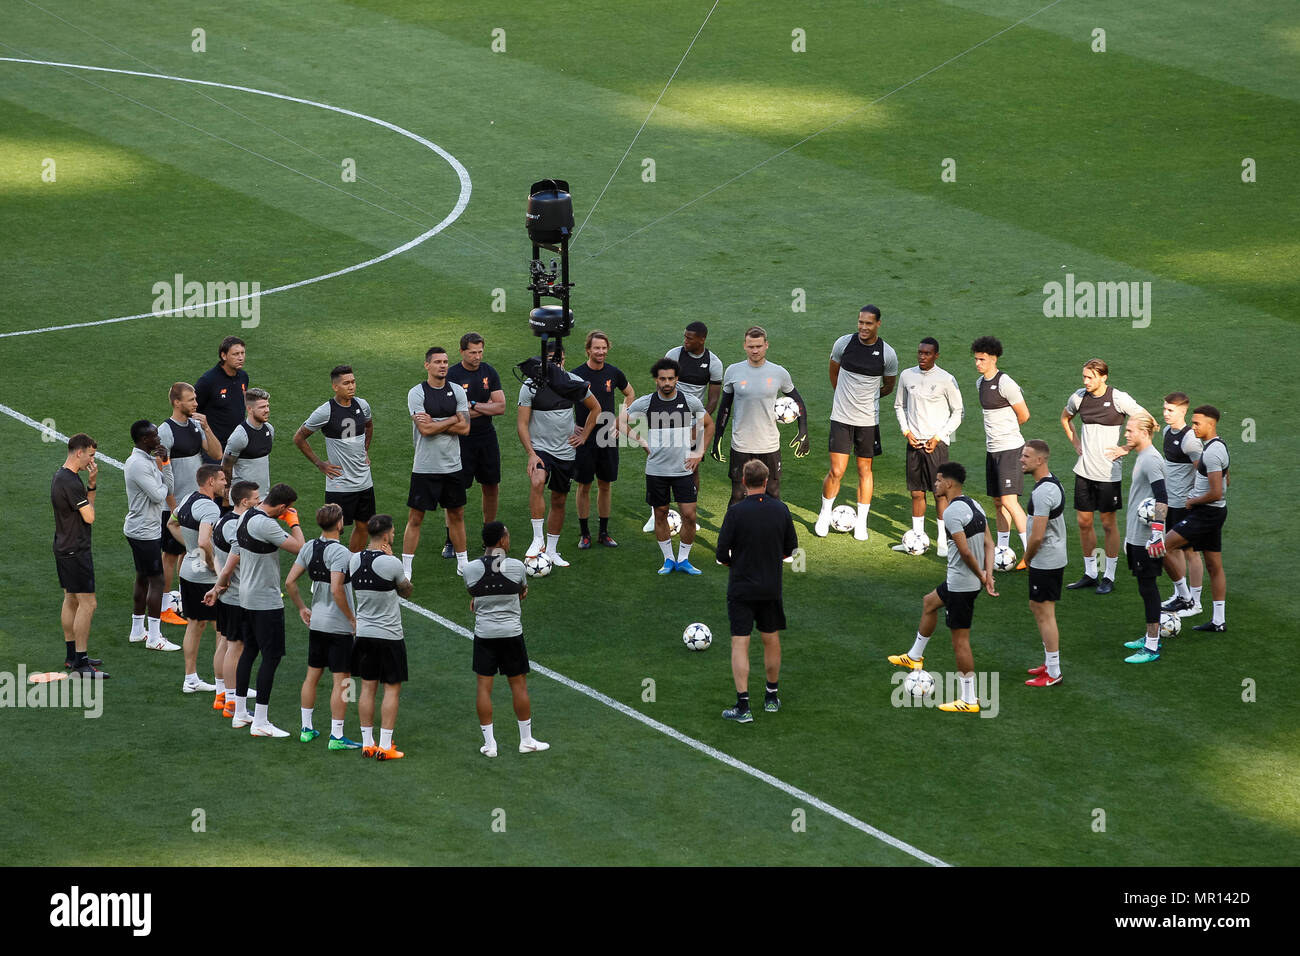 Liverpool Manager Jurgen Klopp speaks to his team during Liverpool training, prior to the UEFA Champions League Final match between Real Madrid and Liverpool, at Olimpiyskiy National Sports Complex on May 25th 2018 in Kyiv, Ukraine. (Photo by Daniel Chesterton/phcimages.com) Stock Photo